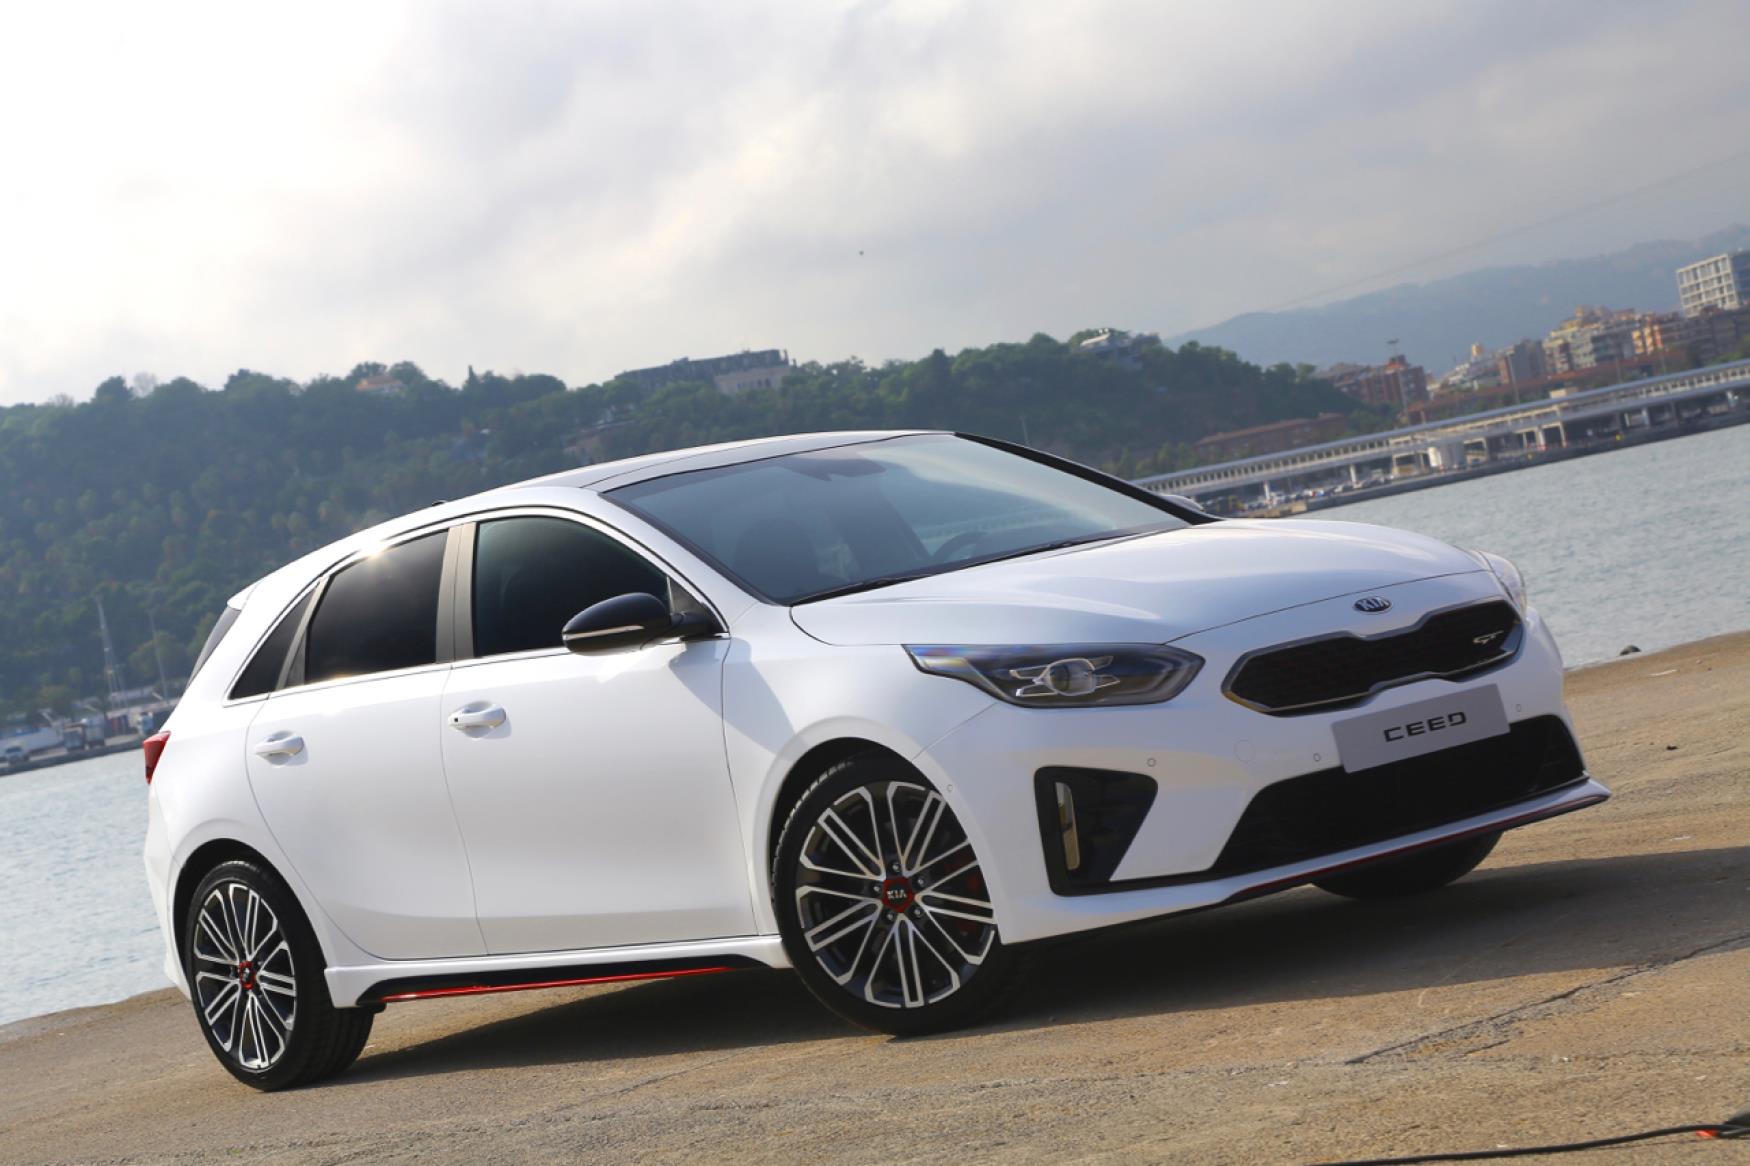 All-new Kia Ceed GT and GT-Line unveiled - First Vehicle Leasing Car ...